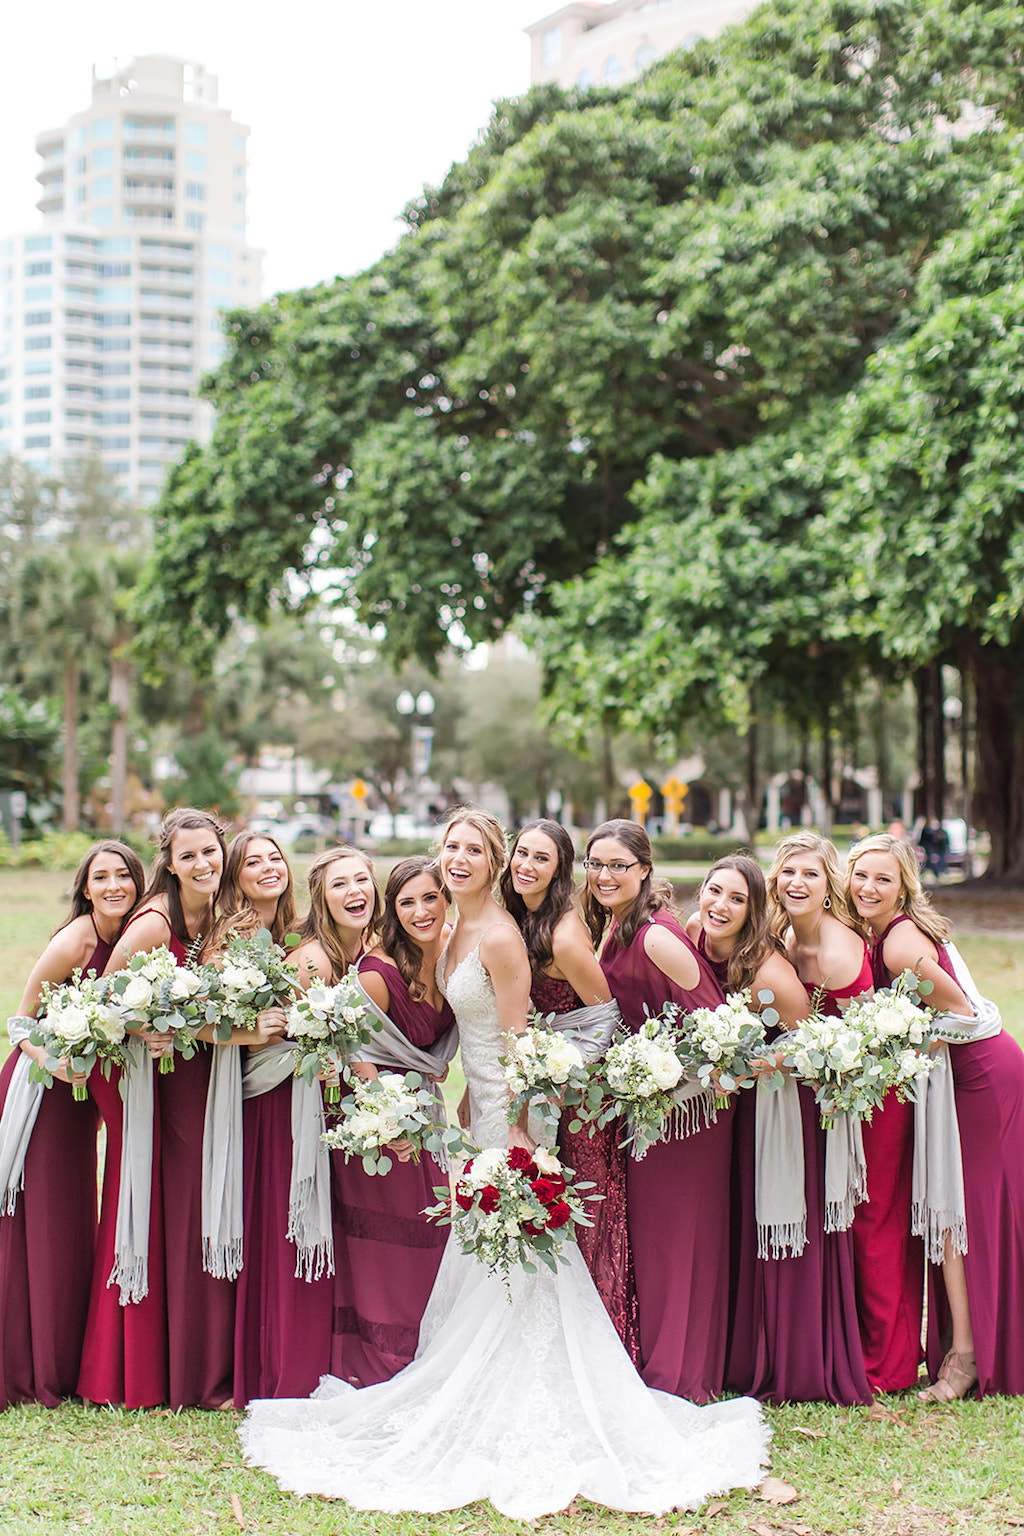 Christmas Inspired Bride and Bridesmaids, Long Garnet and Burgundy Dresses, Mix and Match Dresses Color and Style, Silver Shaw, Carrying Rustic White Bouquet with Greenery, in Downtown St. Pete Straub Park | Tampa Bay Wedding Photographers Shauna and Jordon Photography